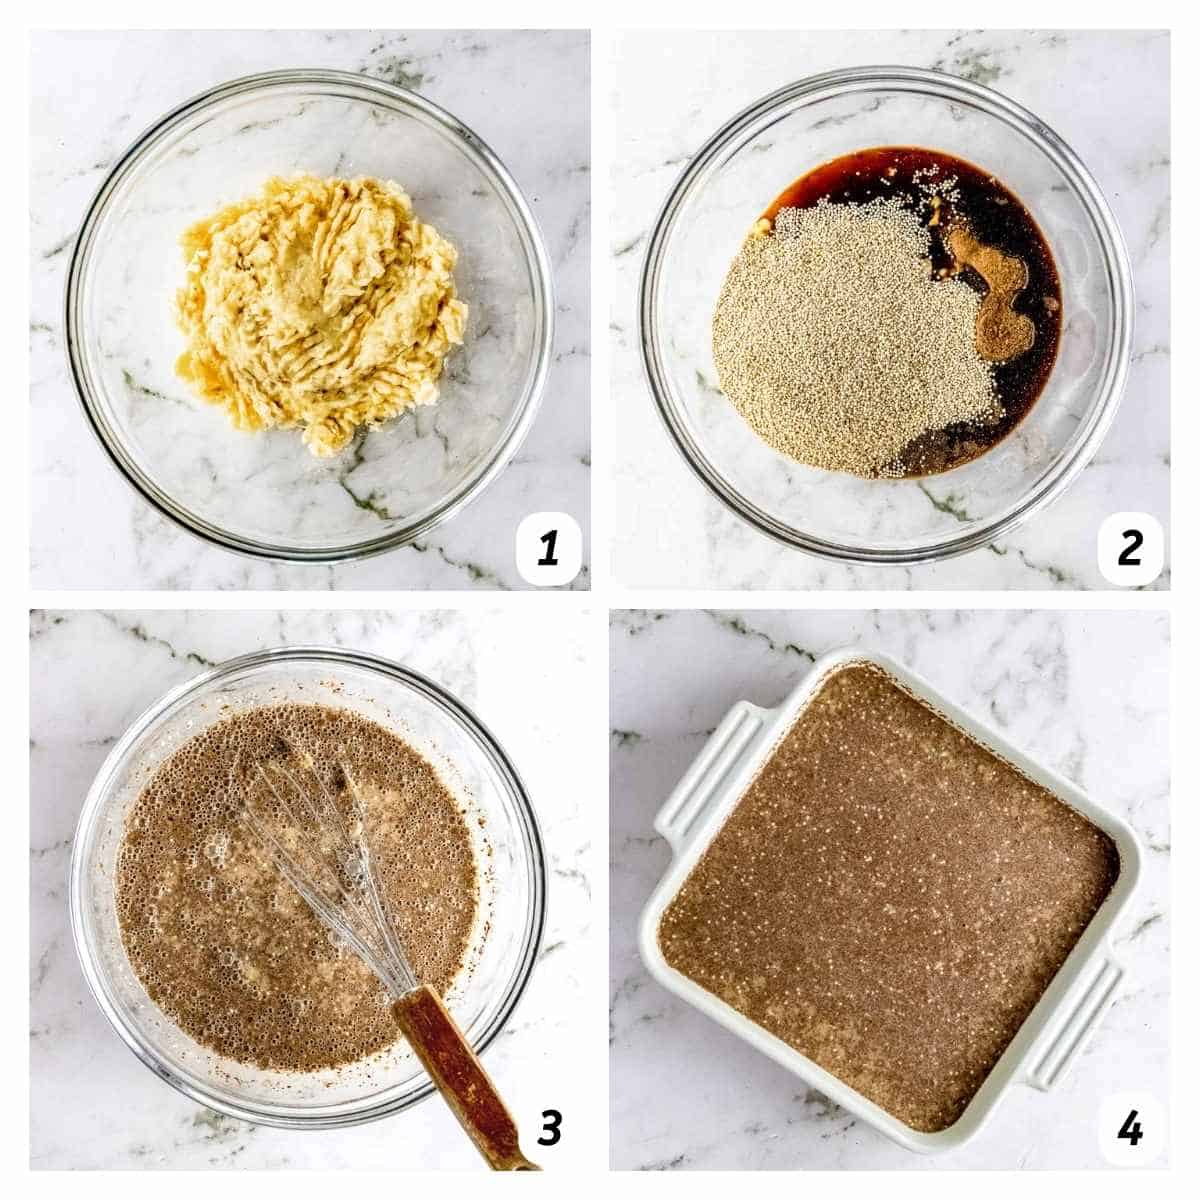 Four panel grid of process shots - mashing up bananas, adding the remaining ingredients, whisking, and baking in a pan.